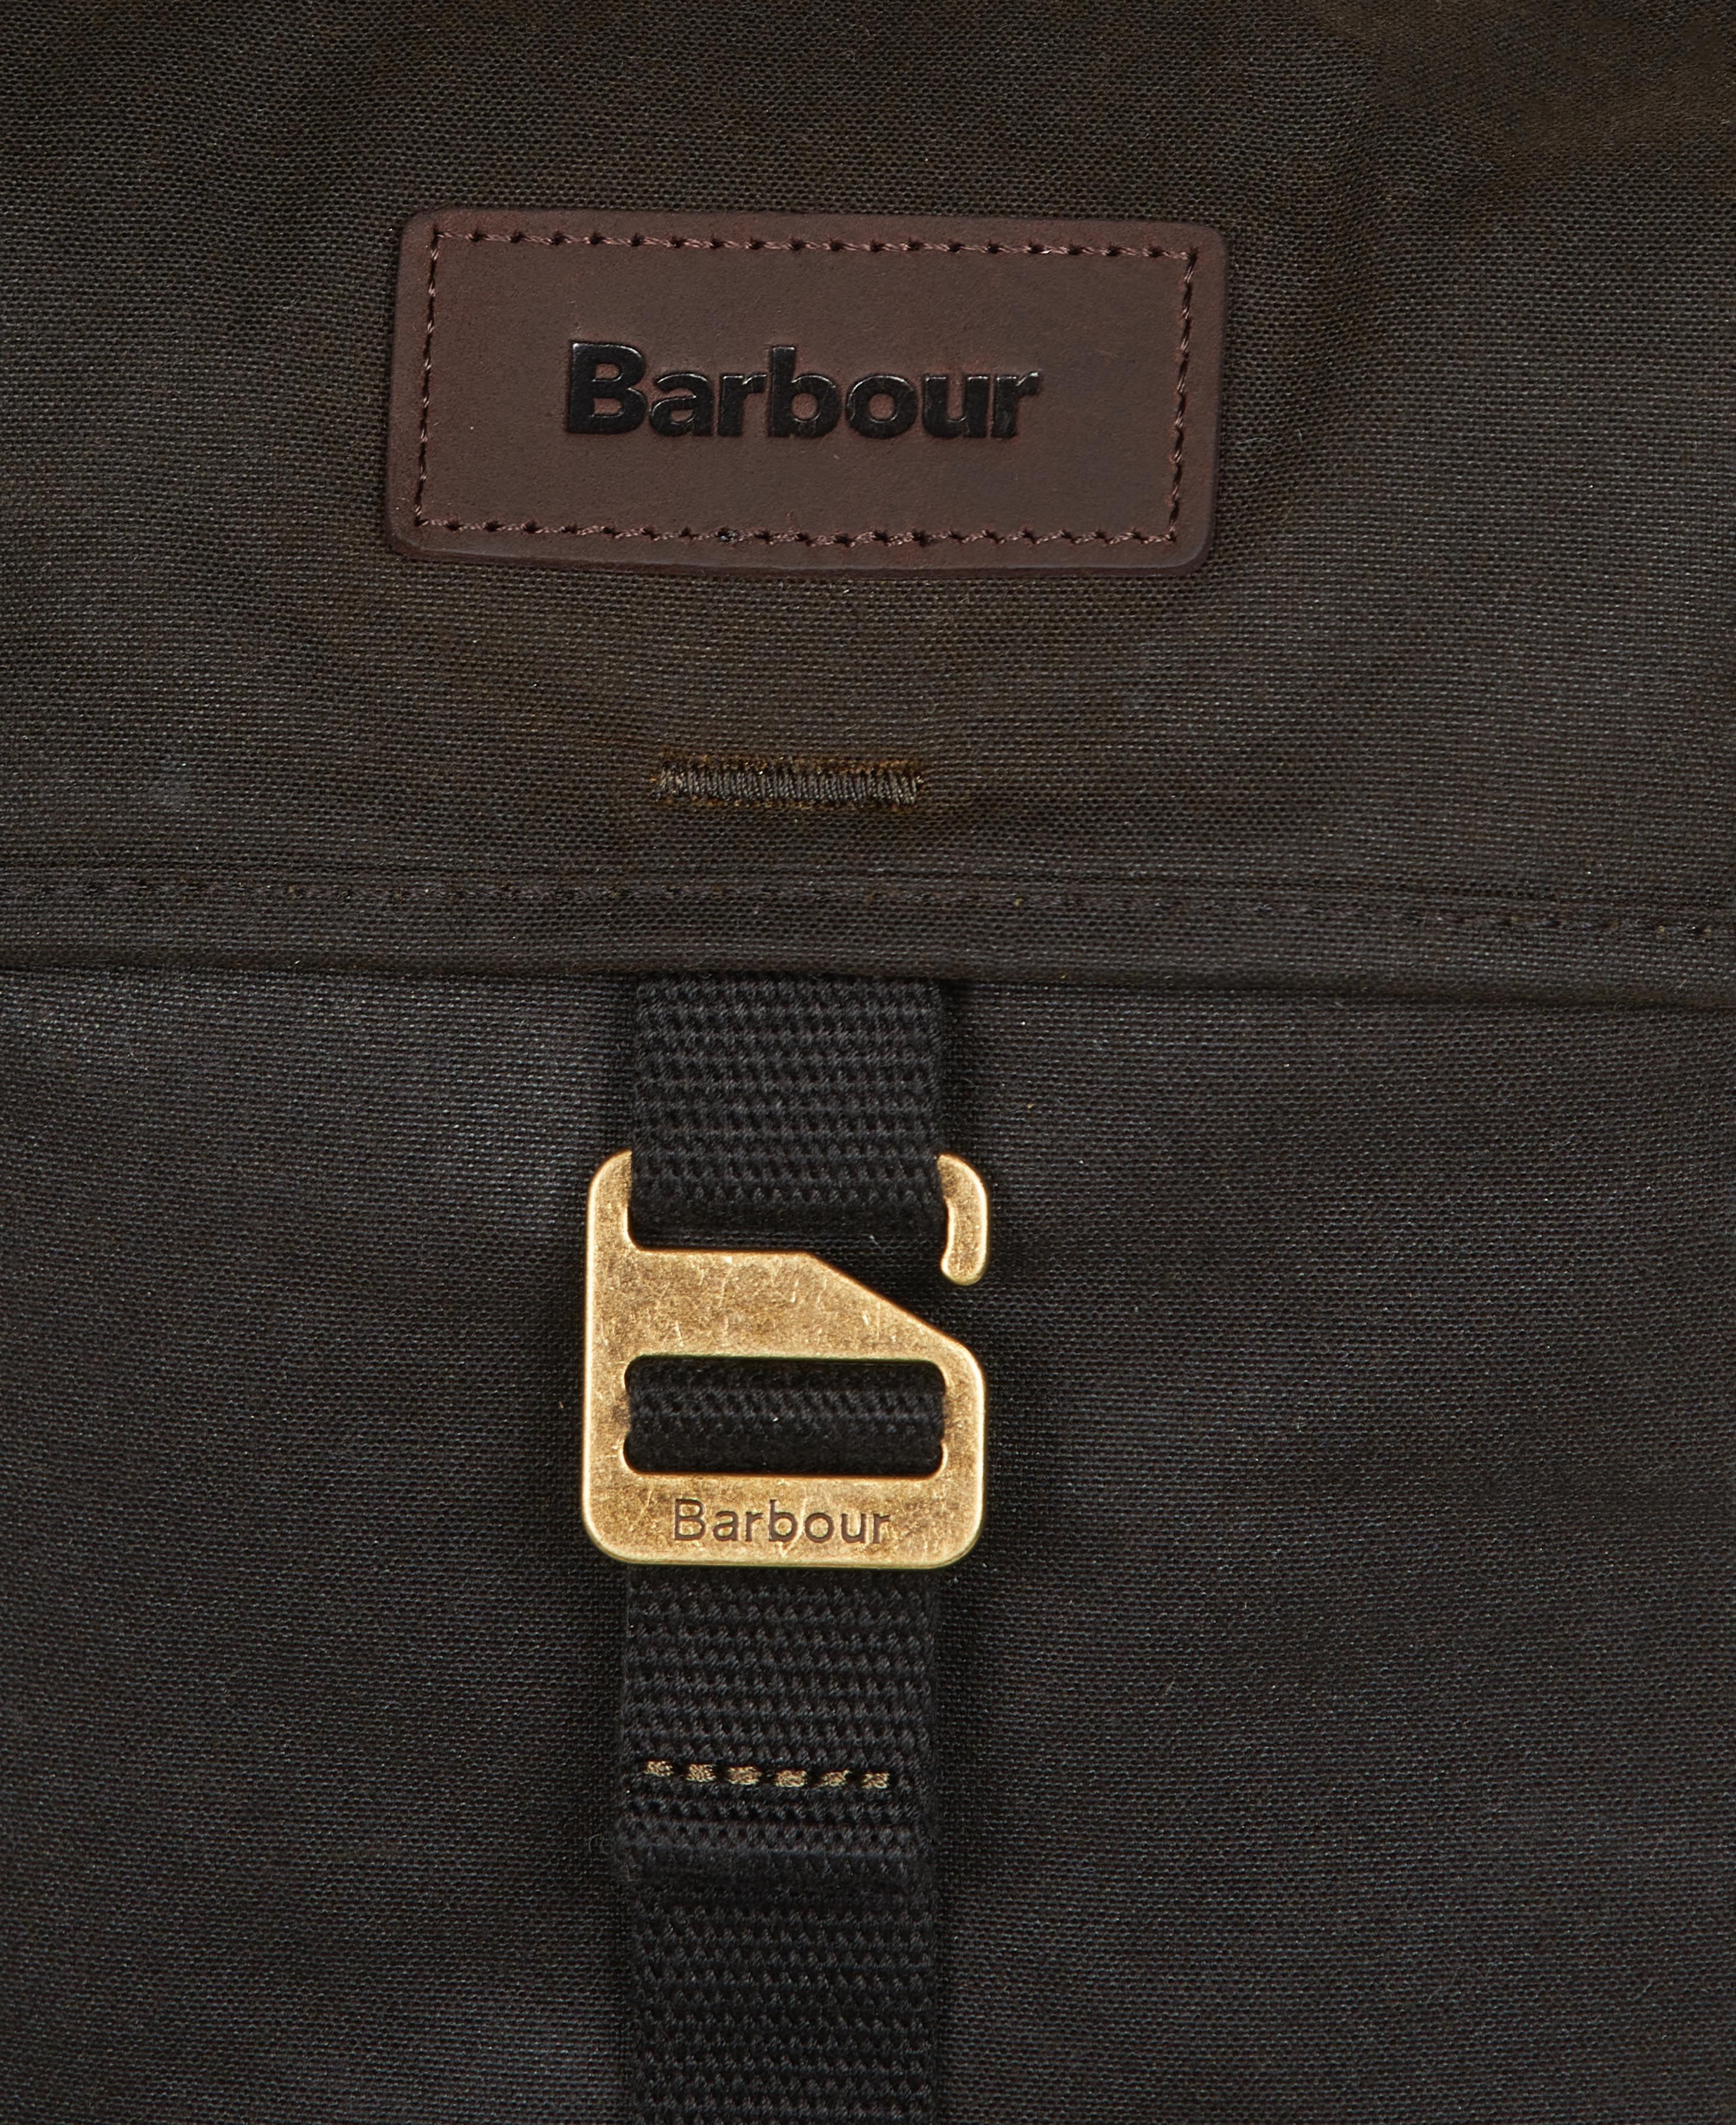 Shop the Barbour Essential Wax Backpack in Olive | Barbour